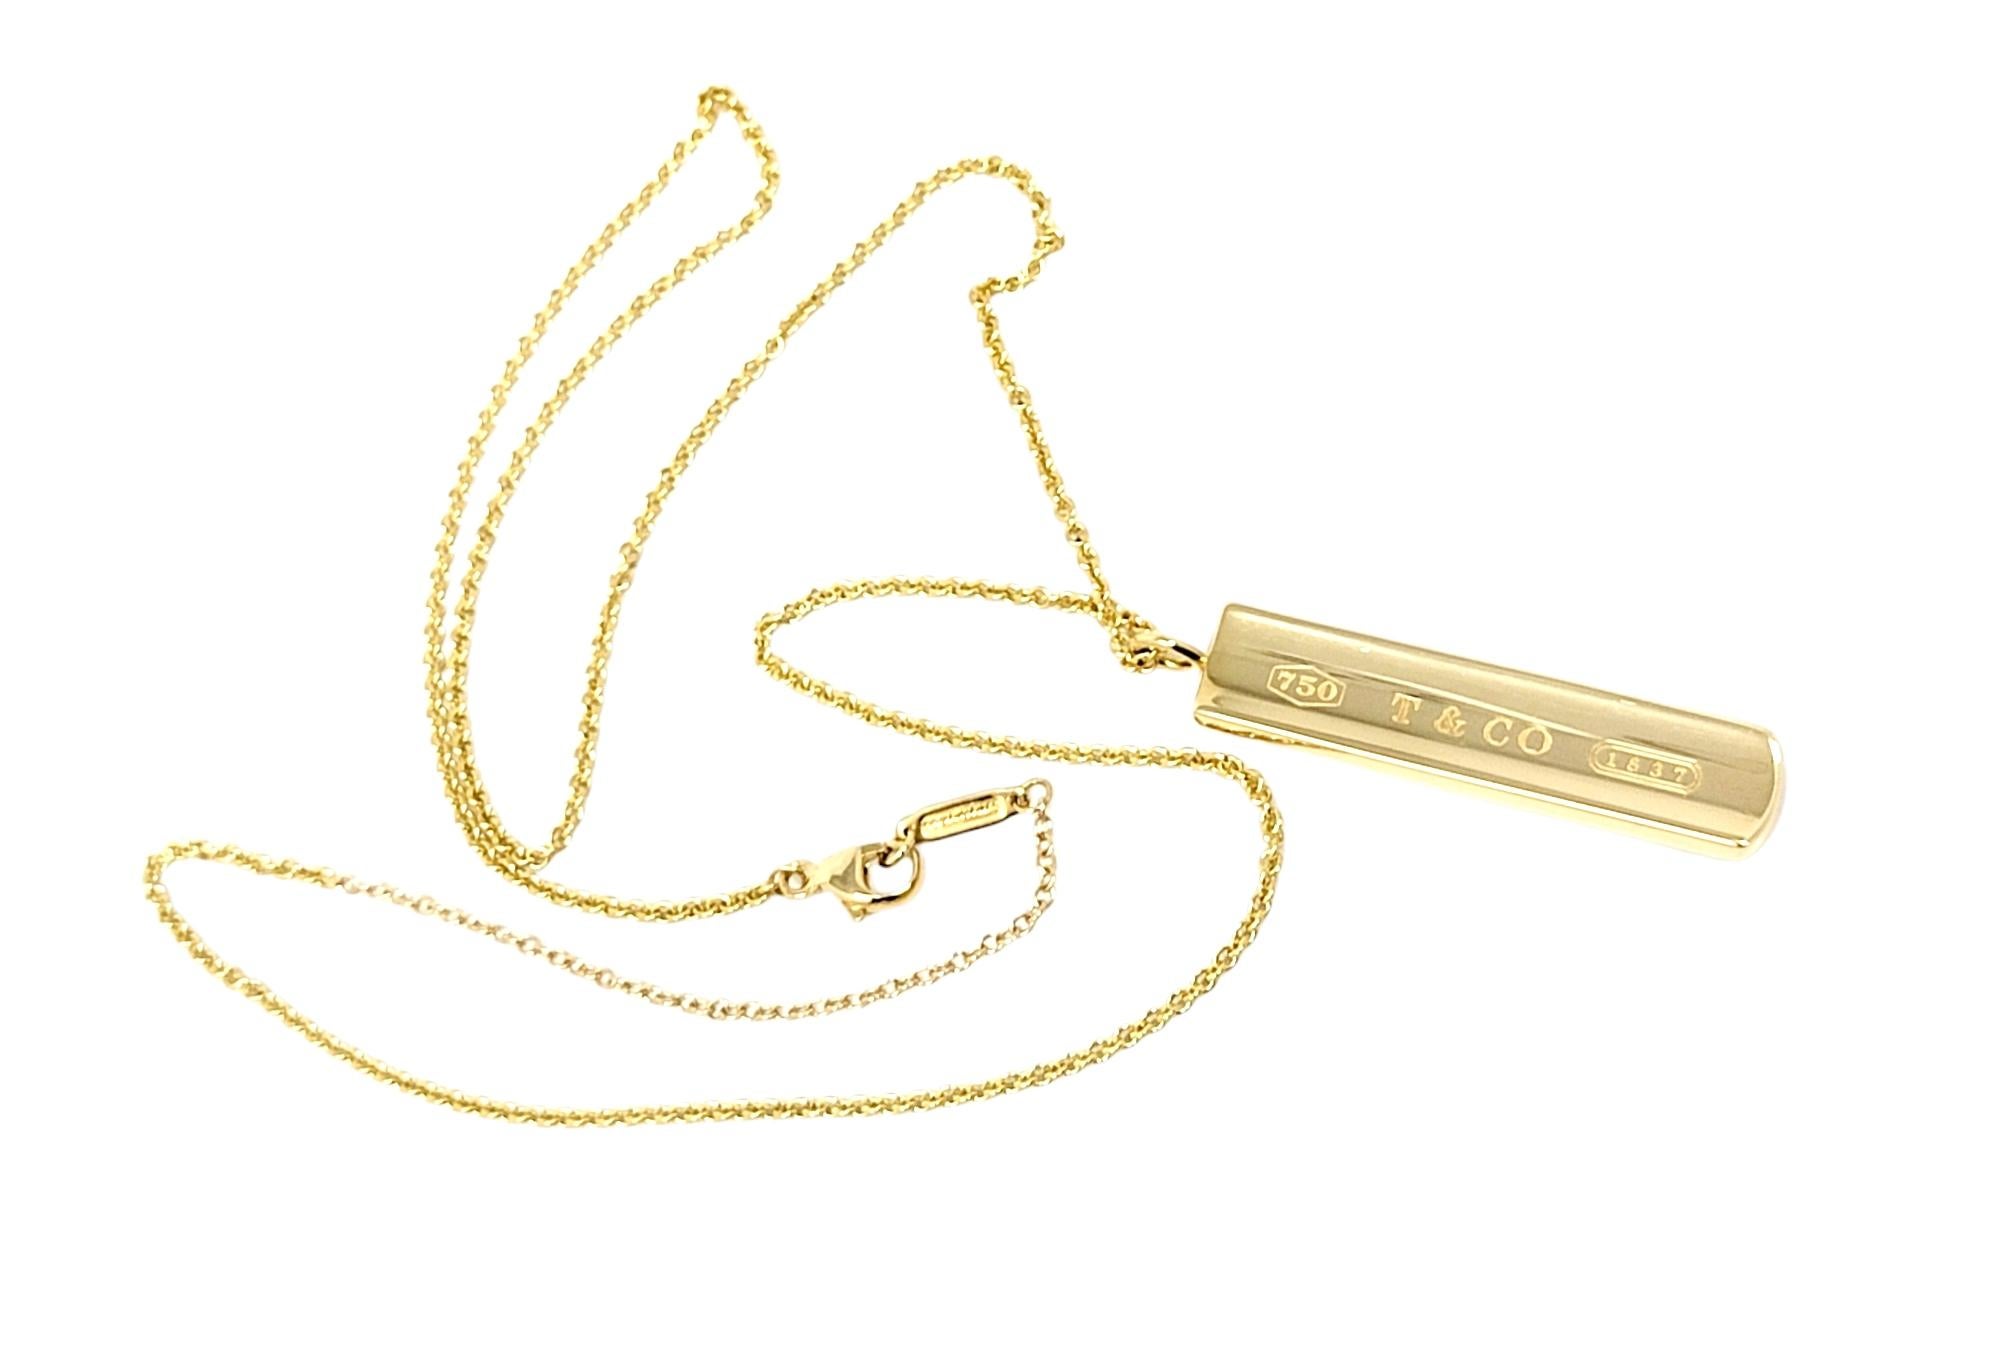 Tiffany & Co. 1837 Vertical Bar Pendant Necklace in 18 Karat Yellow Gold 1